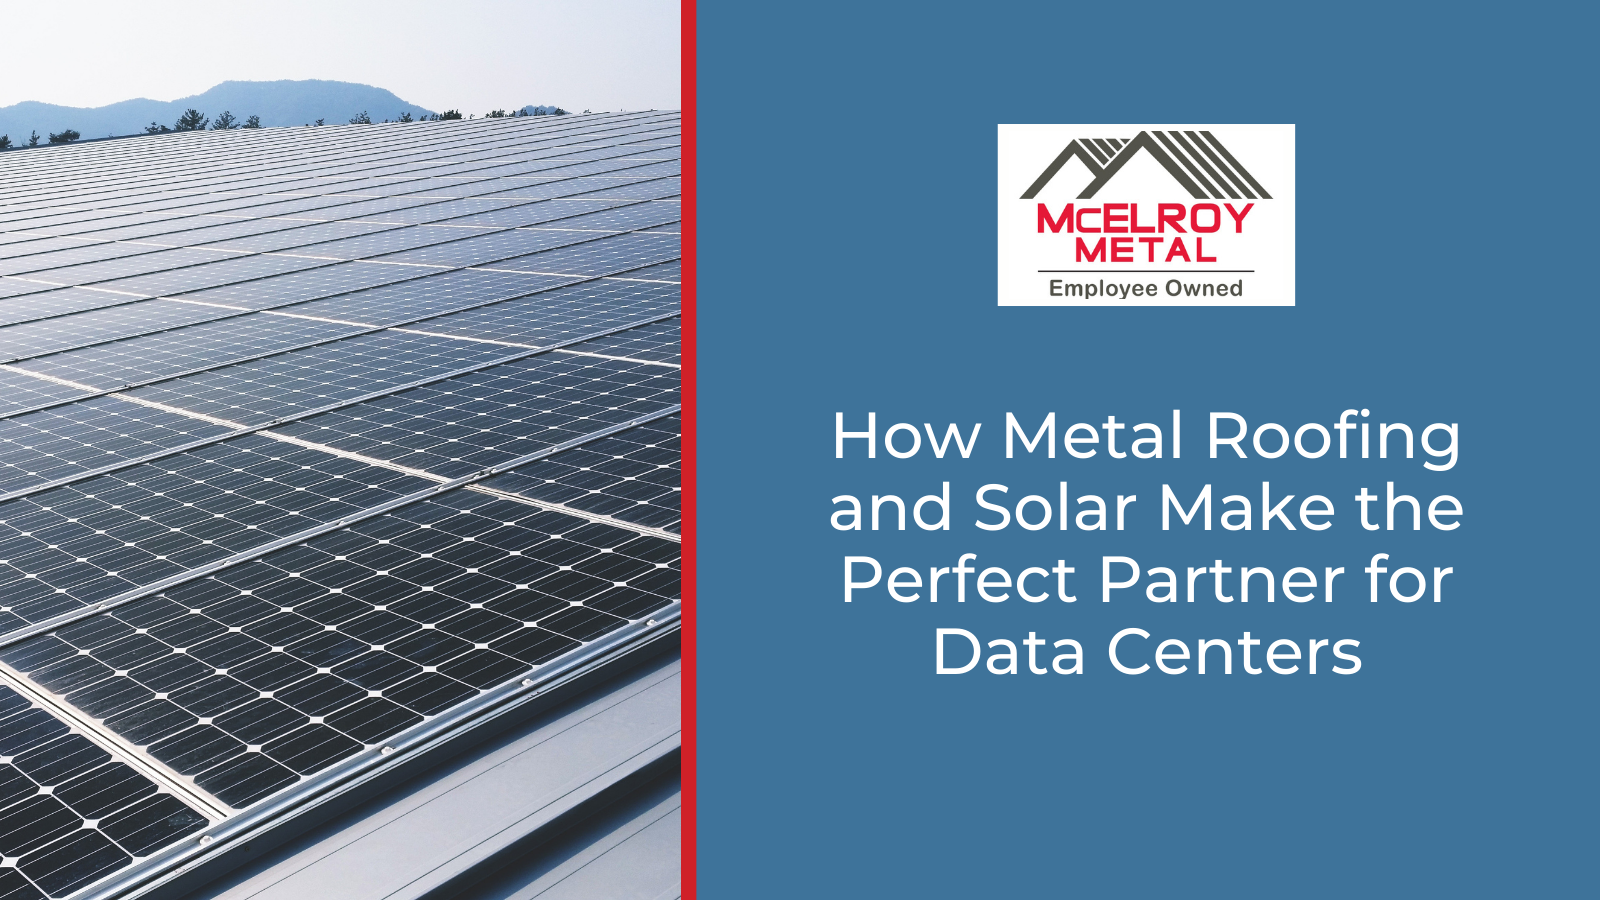 How Metal Roofing and Solar Make the Perfect Partner for Data Centers